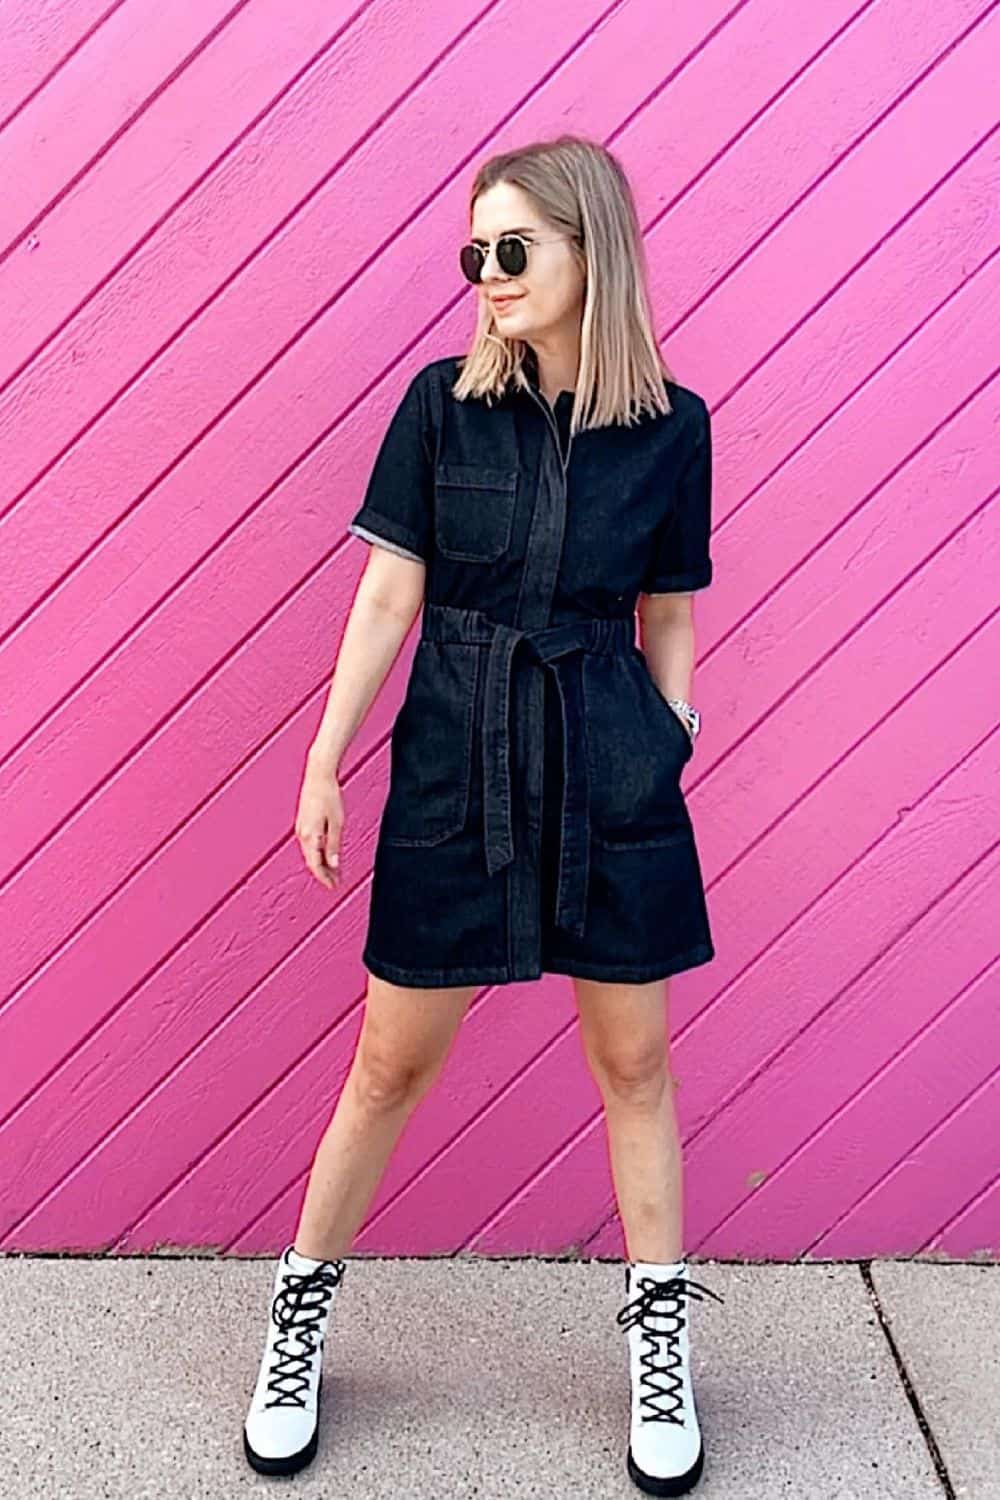 Combat Boots Outfit With Denim Dress